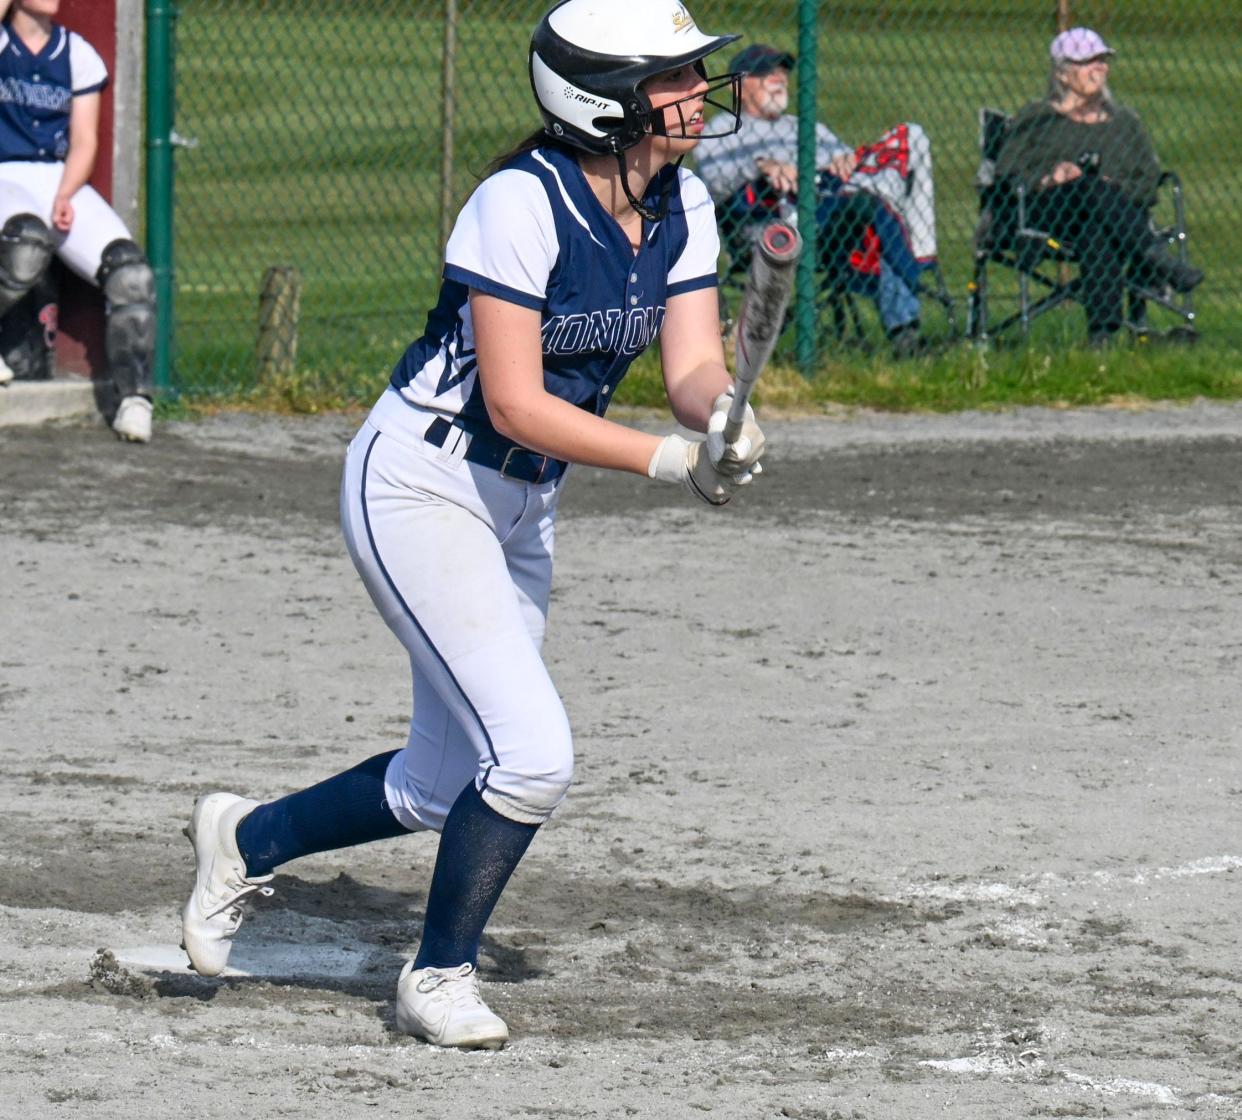 Kiley Mawn of Monomoy gets hold of a Sturgis pitch for a triple late in the game.